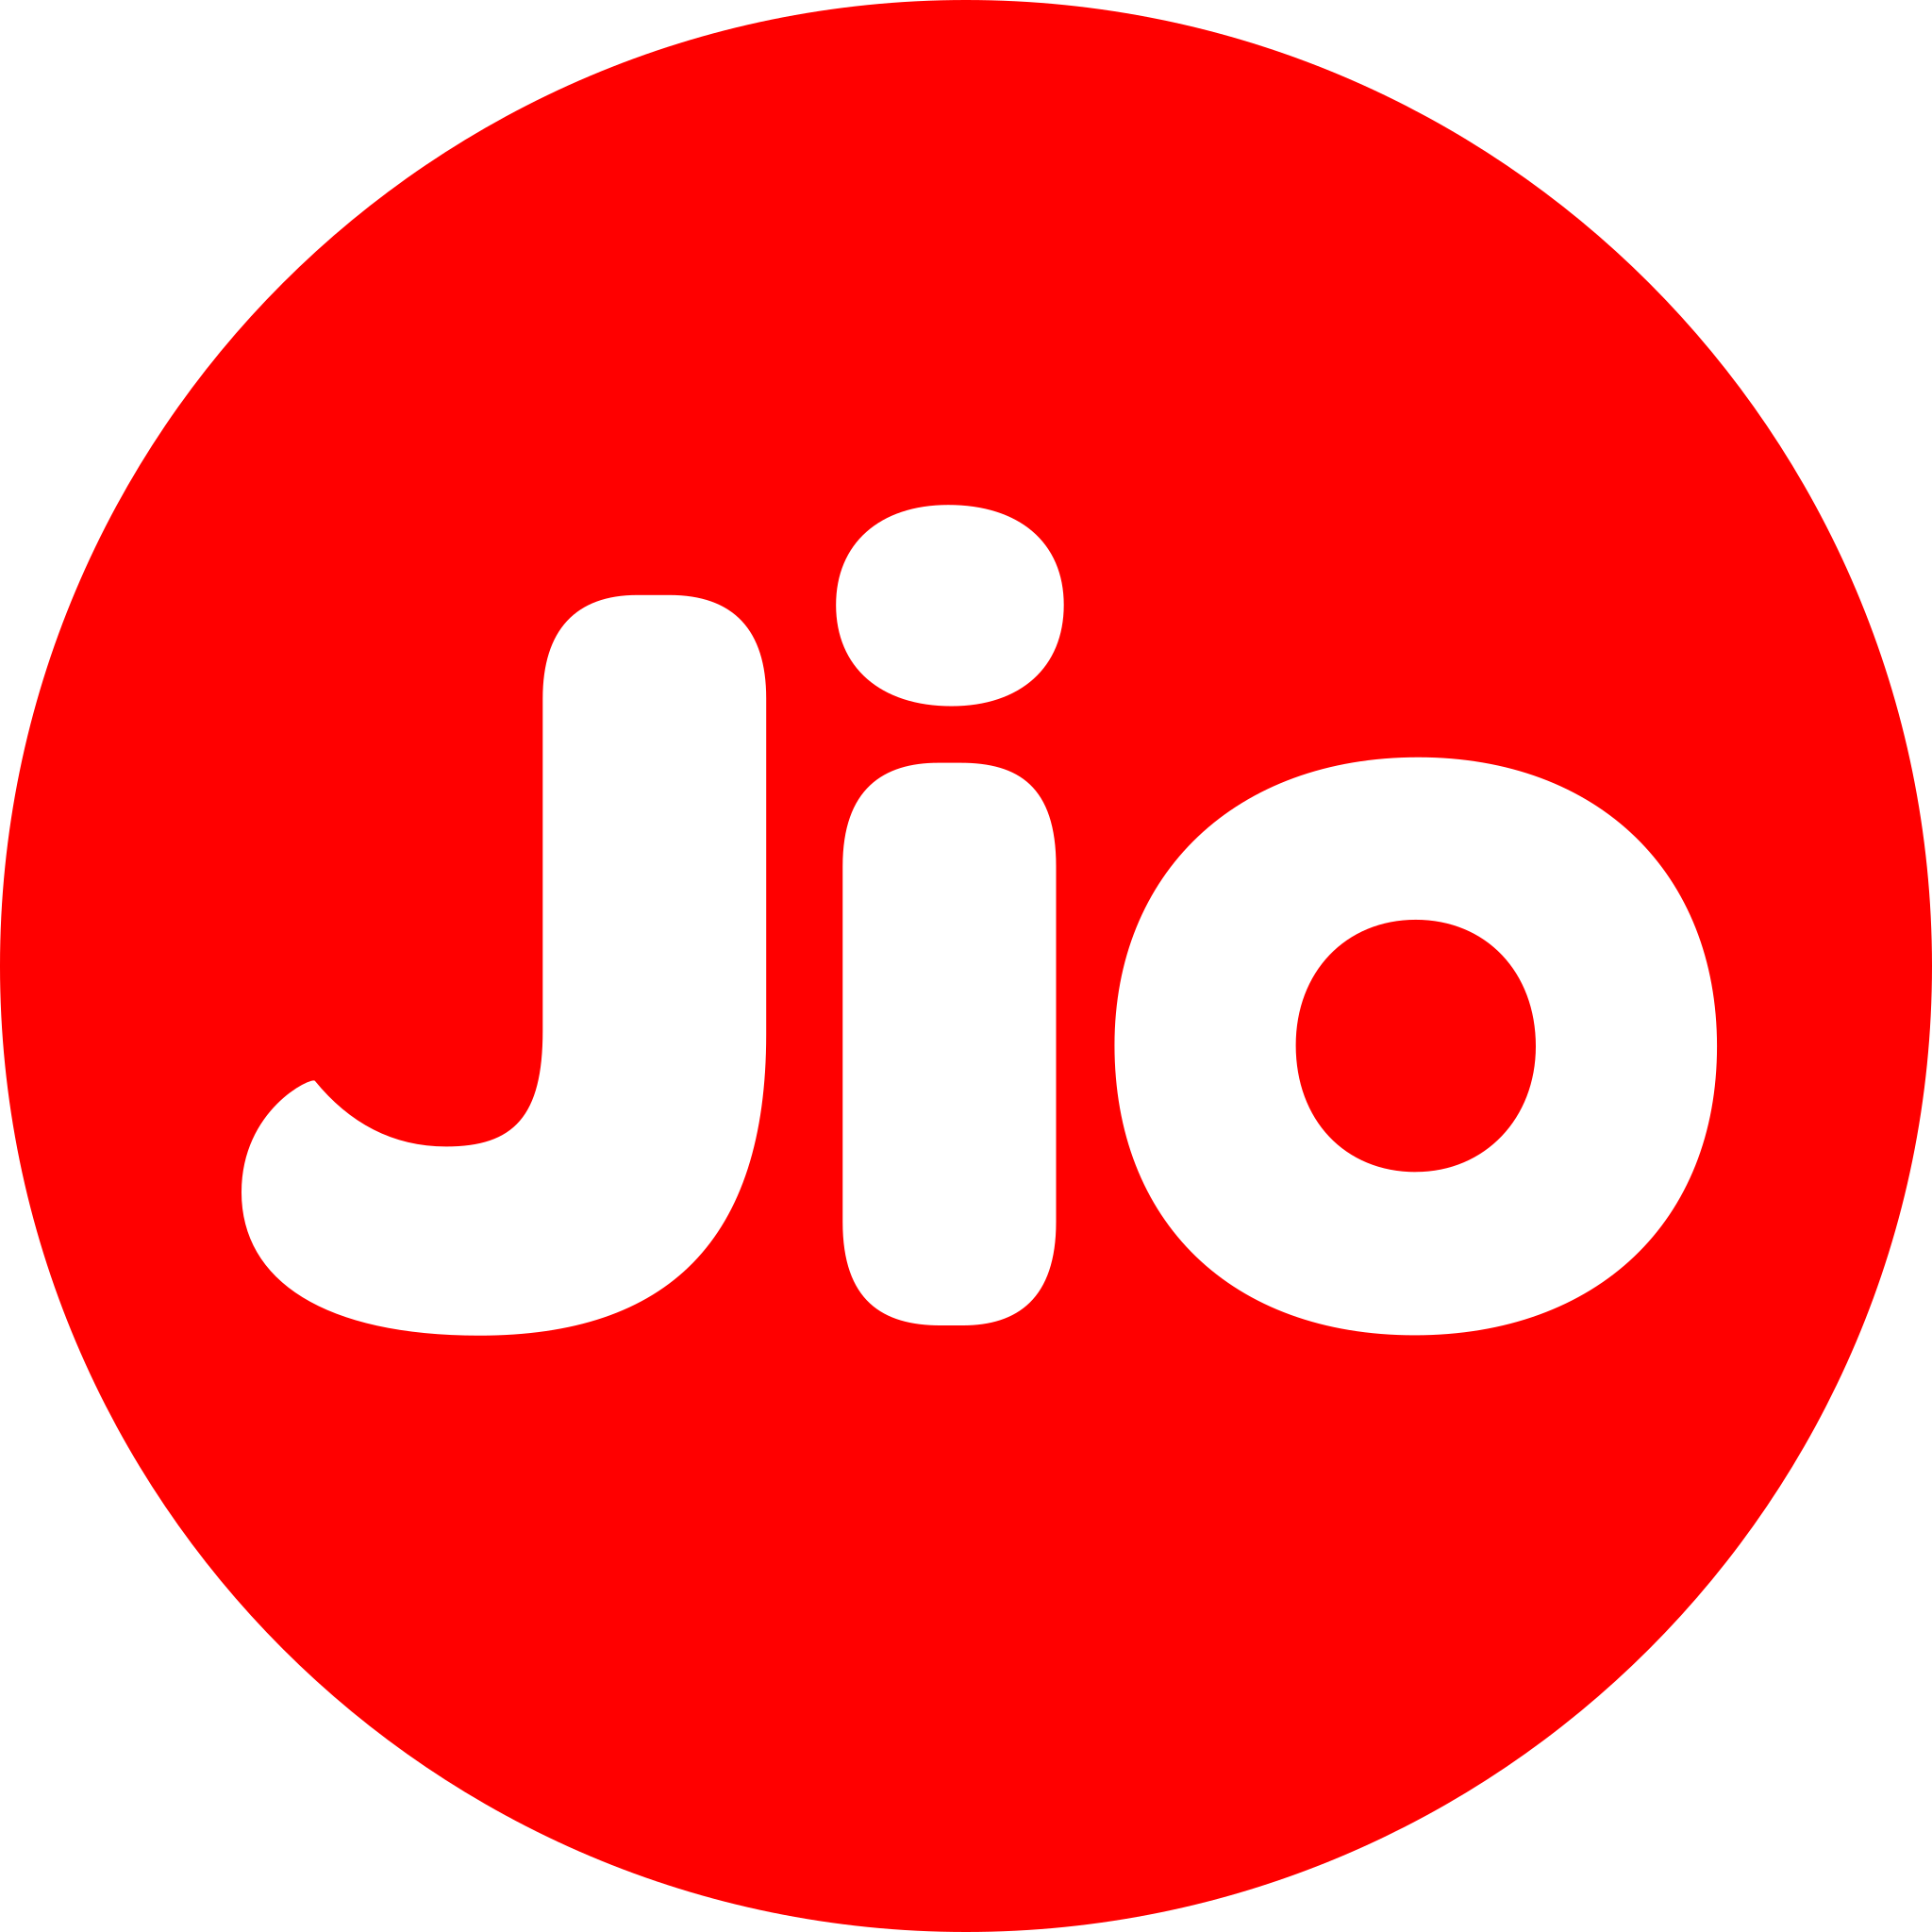 Reliance Jio Introduces New Data Booster Plans with 5G Benefits: Here’s What You Need to Know